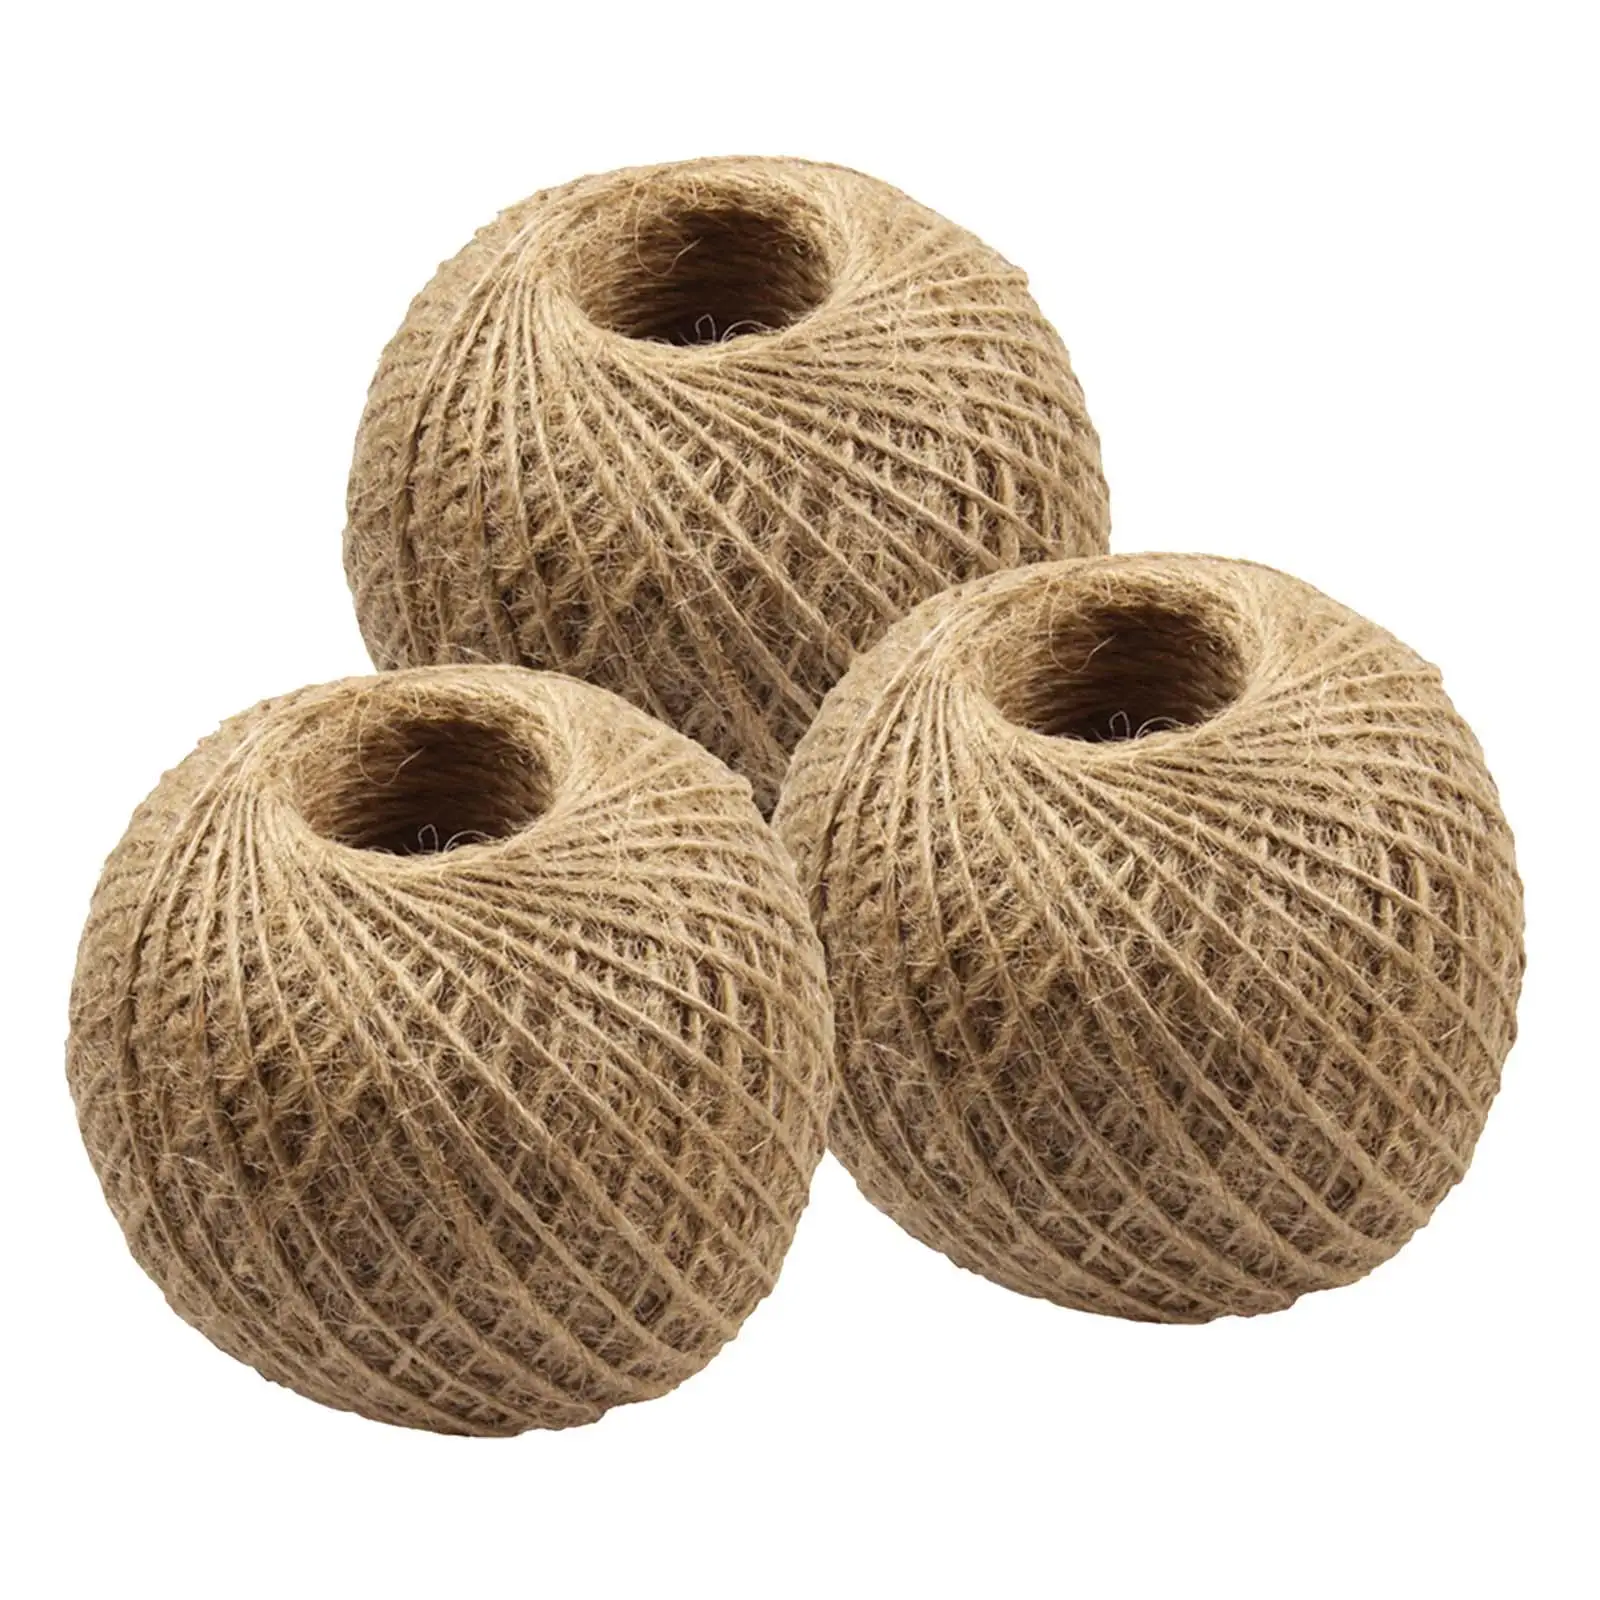 

3x 2mm Hemp Cord Jute Rope String 262.5ft Jute Twine Rope for Artworks Plant Hanging Butcher Twine Arts Crafts Gardening